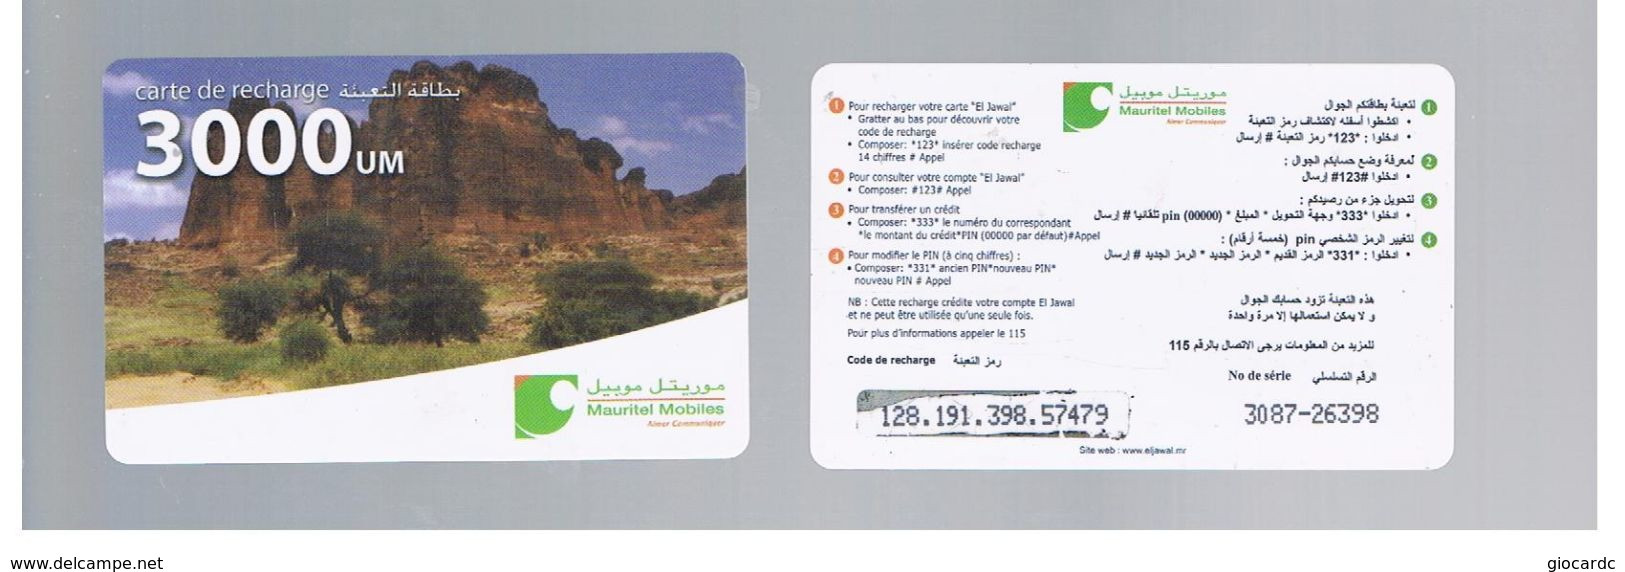 MAURITANIA   - MAURITEL MOBILES (GSM RECHARGE) - MOUNTAINS AND TREES  3000      - USED  -  RIF. 9166 - Bergen